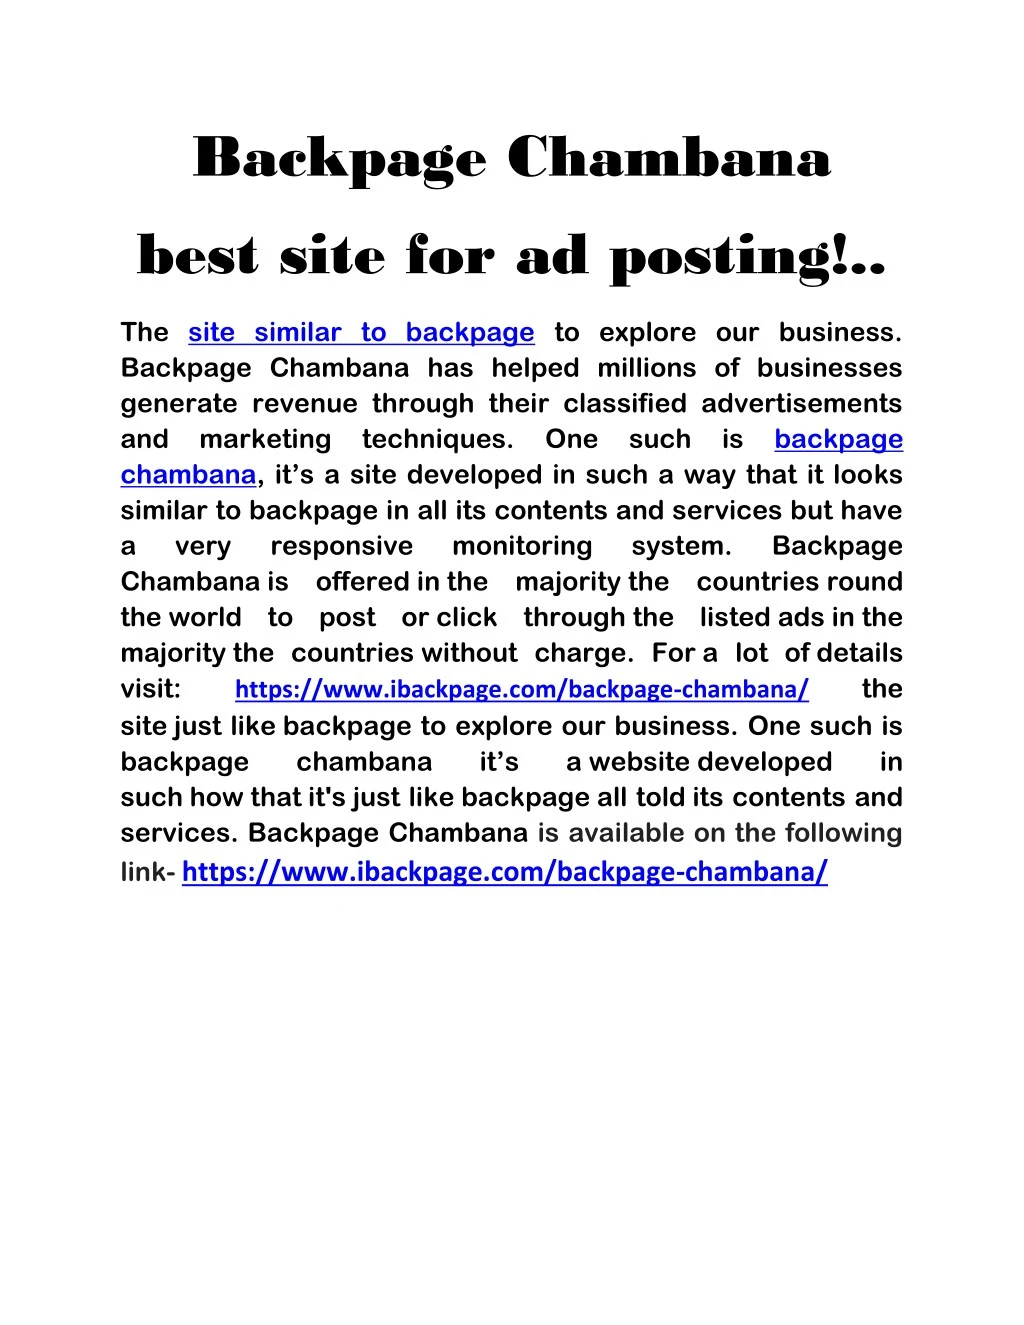 backpage chambana best site for ad posting